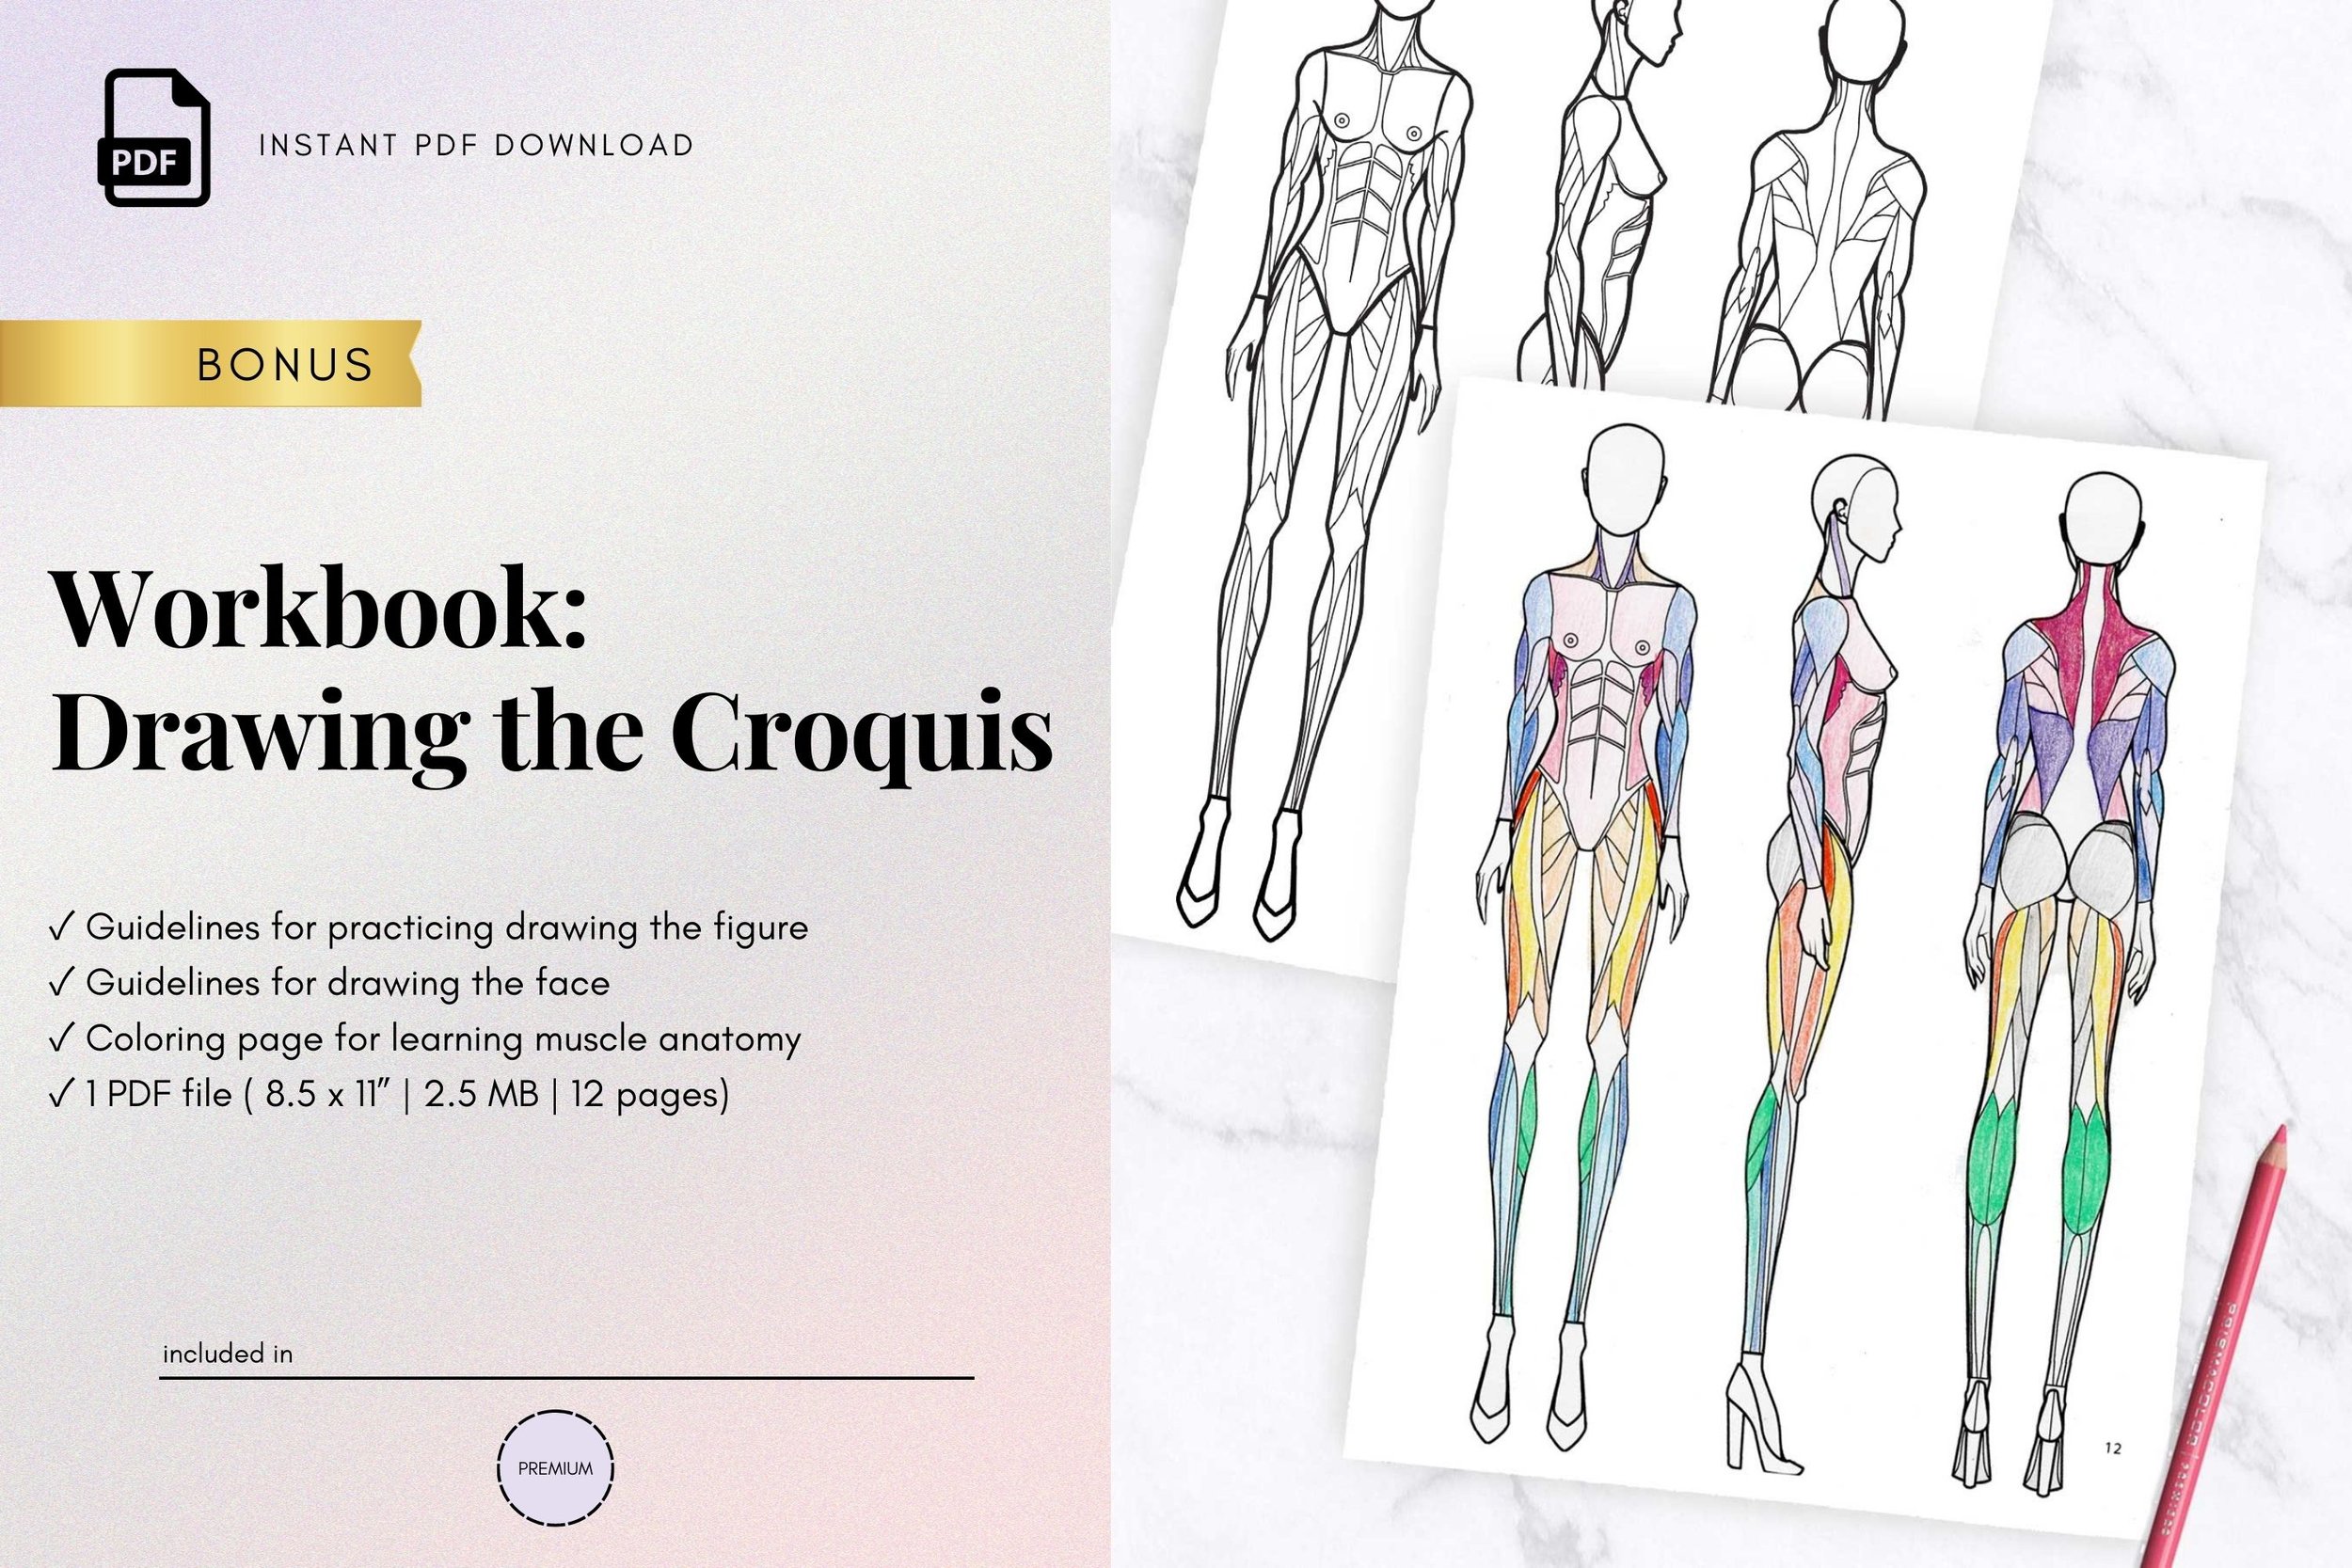 Workbook: Drawing the Croquis (Copy)